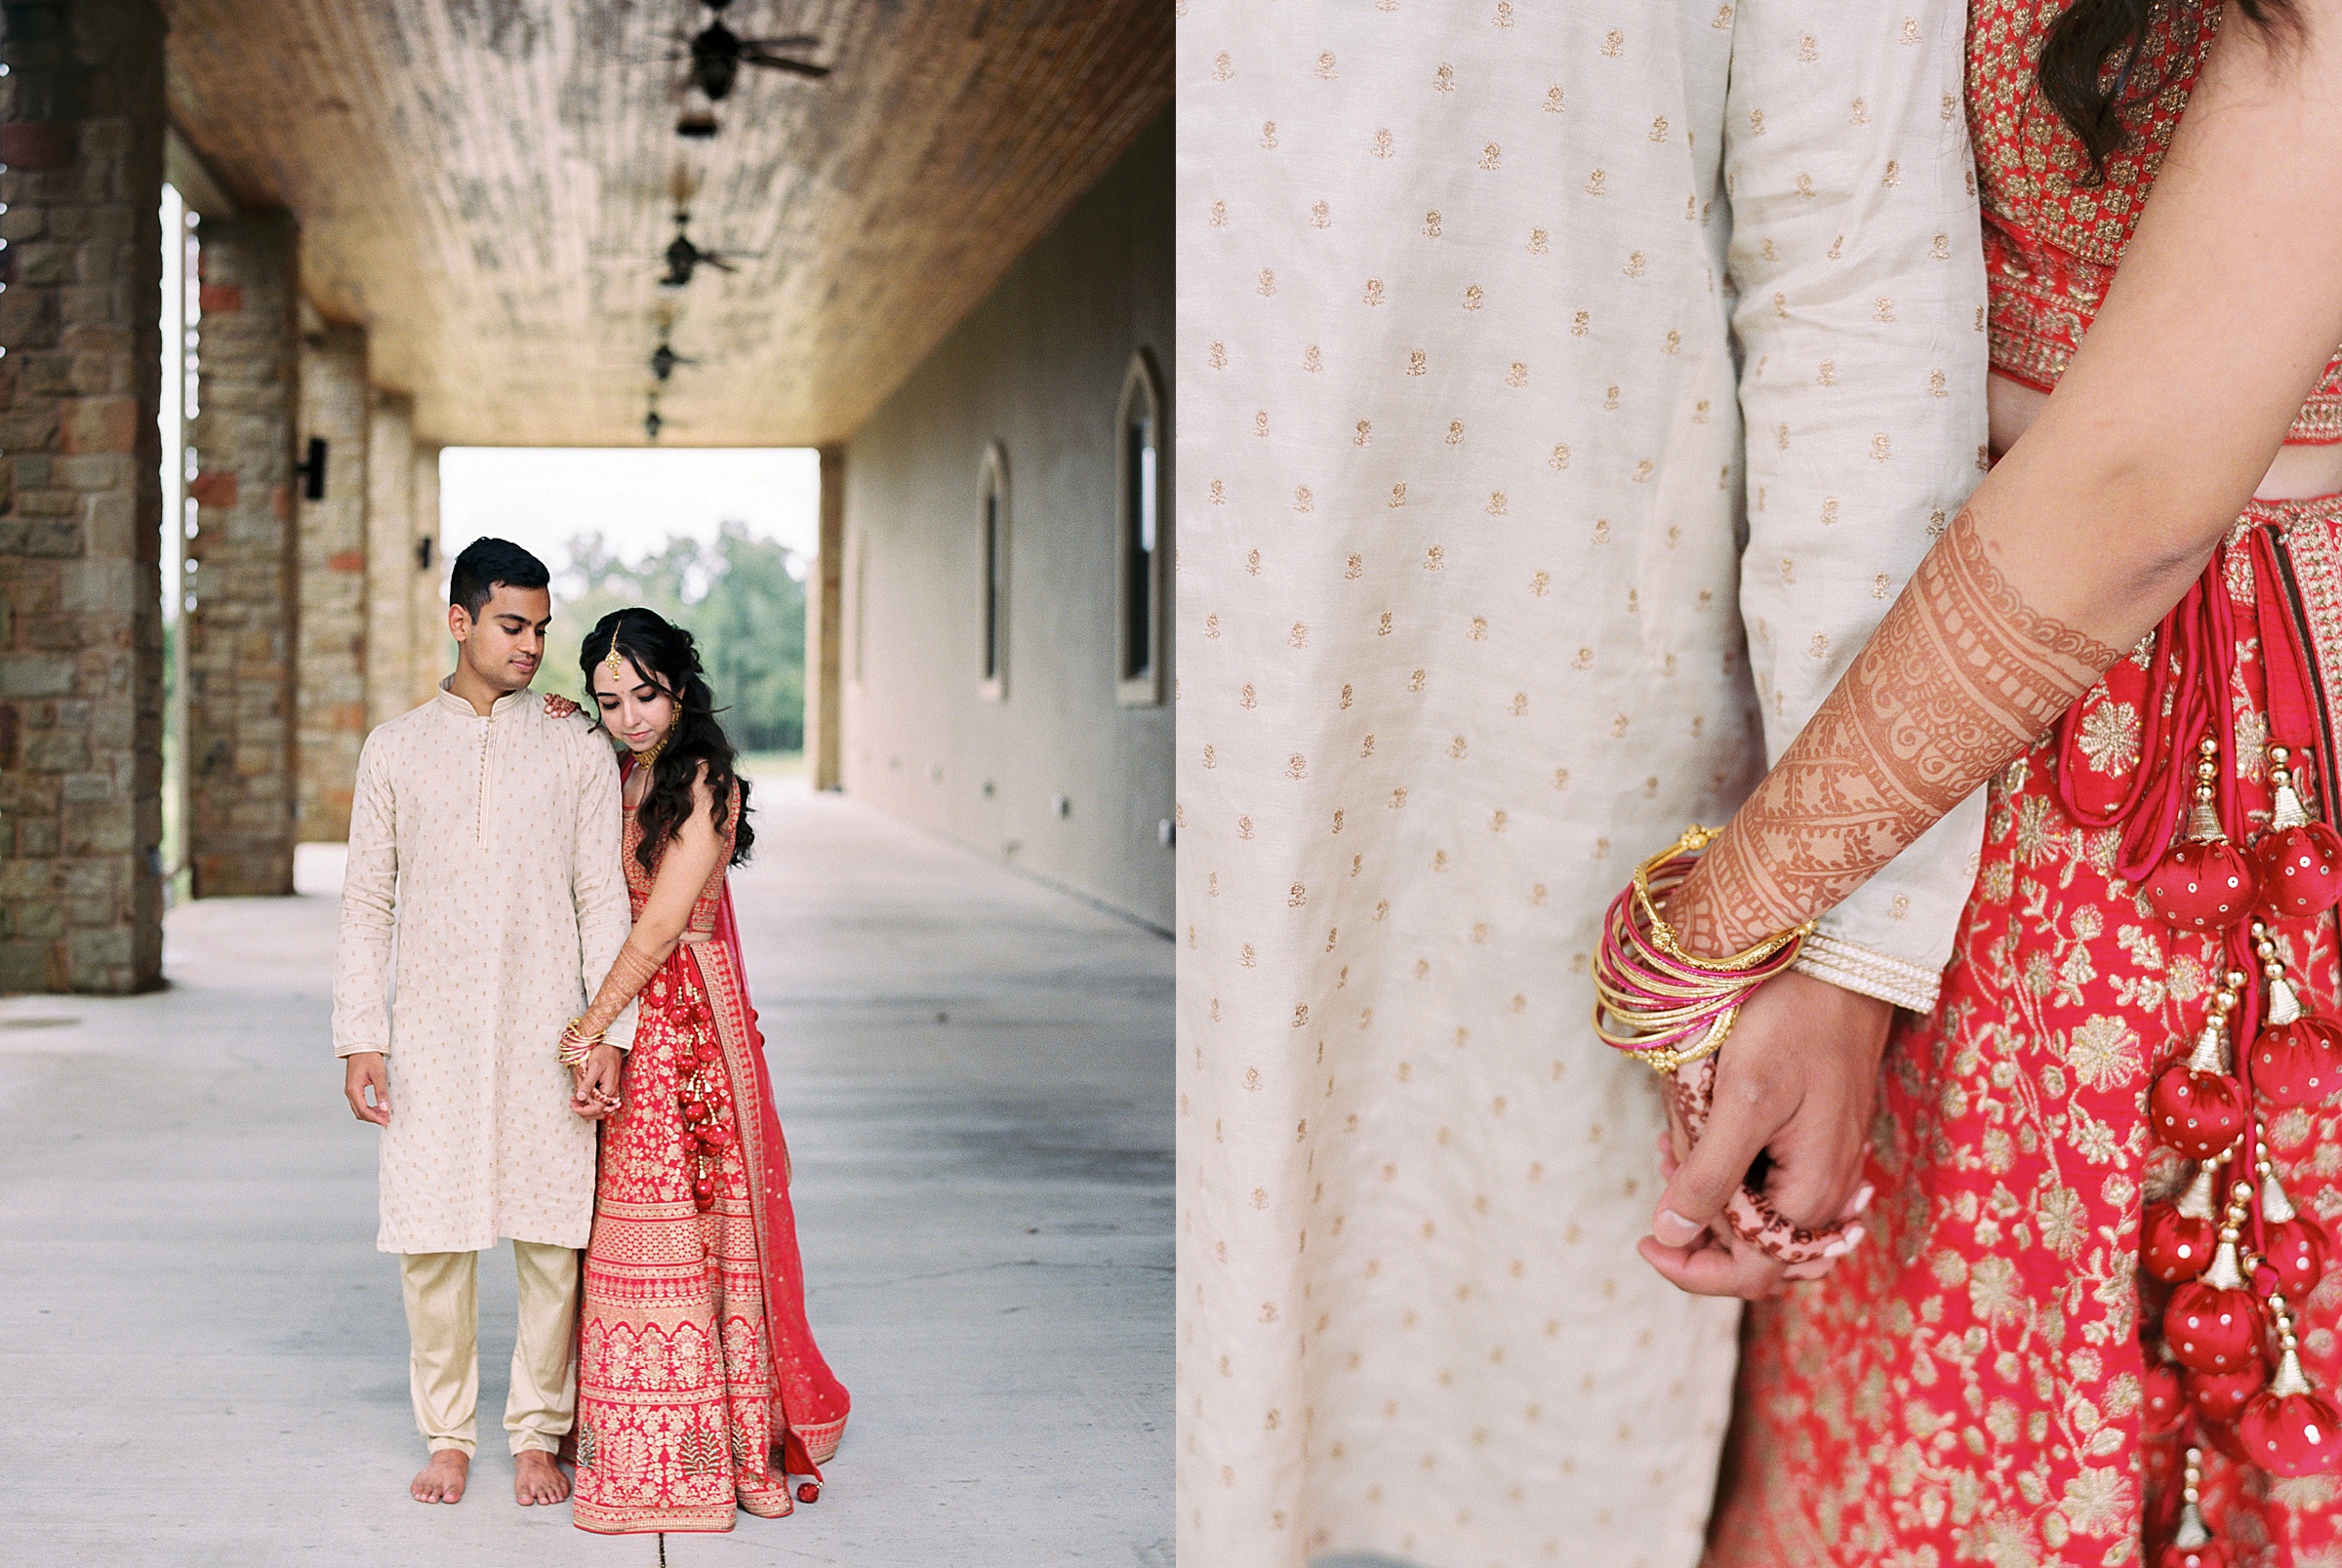 Bride and groom wearing traditional saris and salwar suit